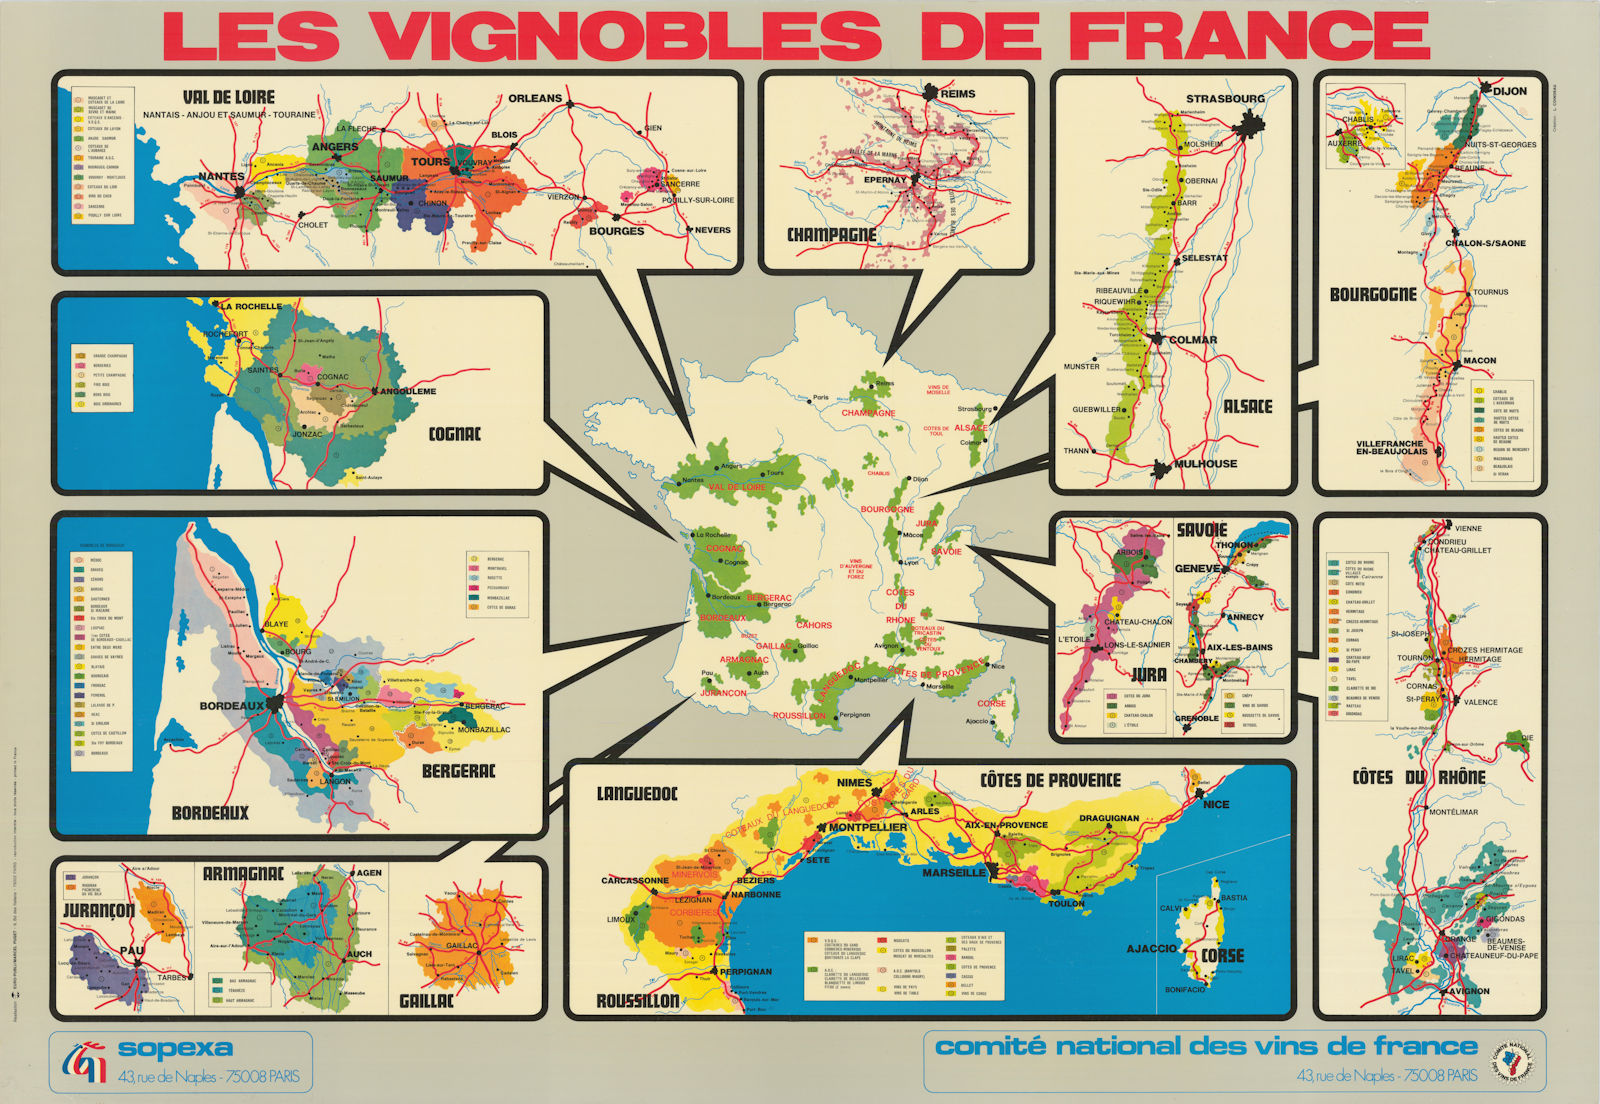 Associate Product Vignobles de France. French wine regions poster map. SOPEXA/CNVF/Coindeau 1970s